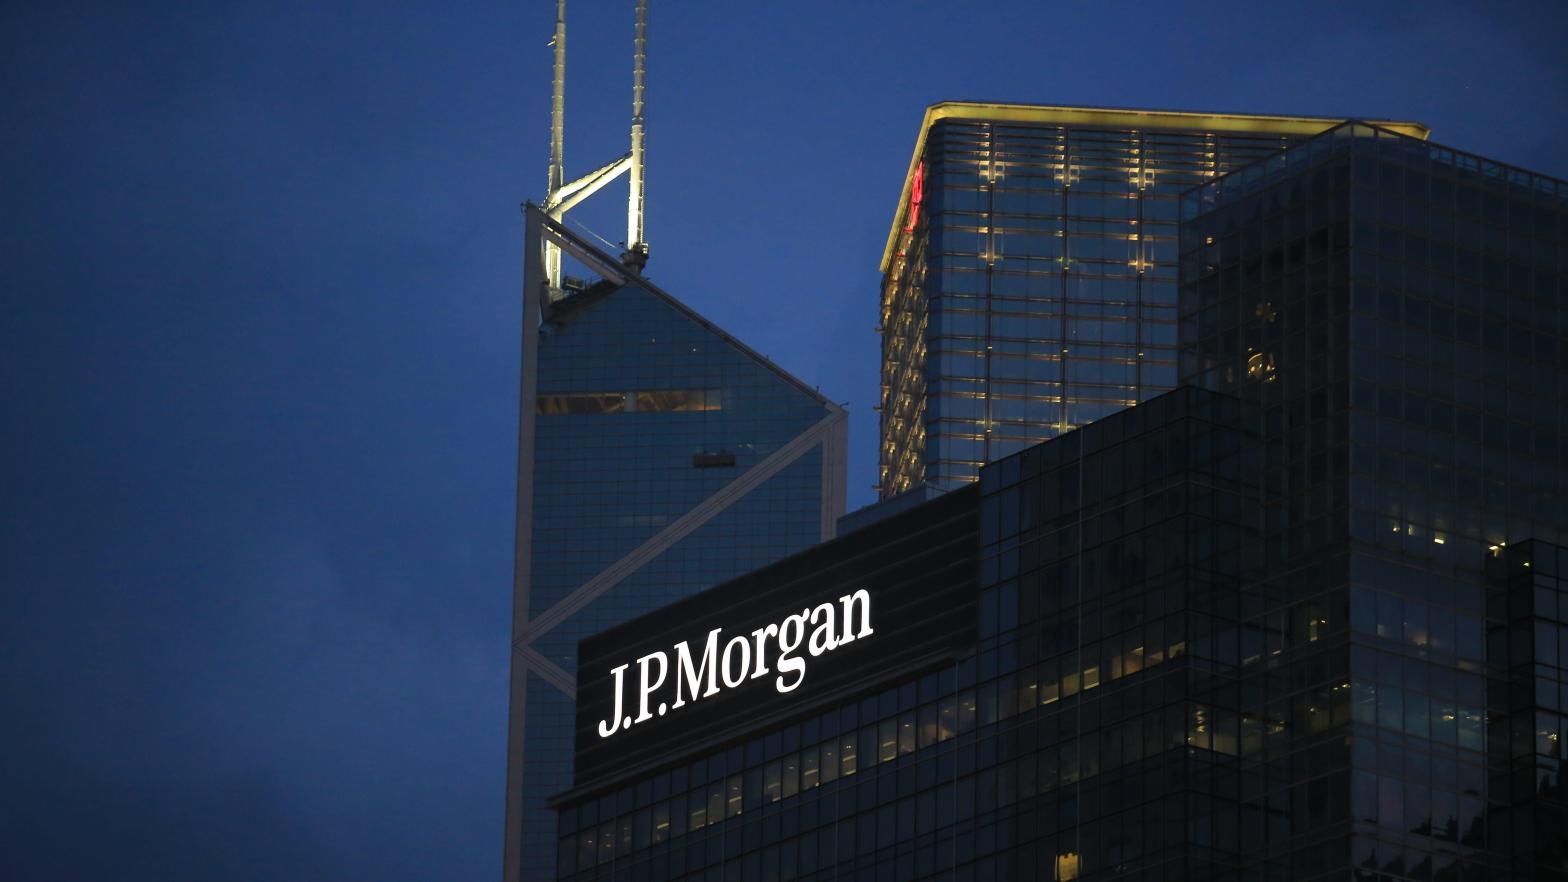 JPMorgan acquired Frank in 2021 for a then unknown amount of money, but a lawsuit filed in December 2022 reveals the company paid $US175 ($243) million for the acquisition. (Image: Lewis Tse, Shutterstock)